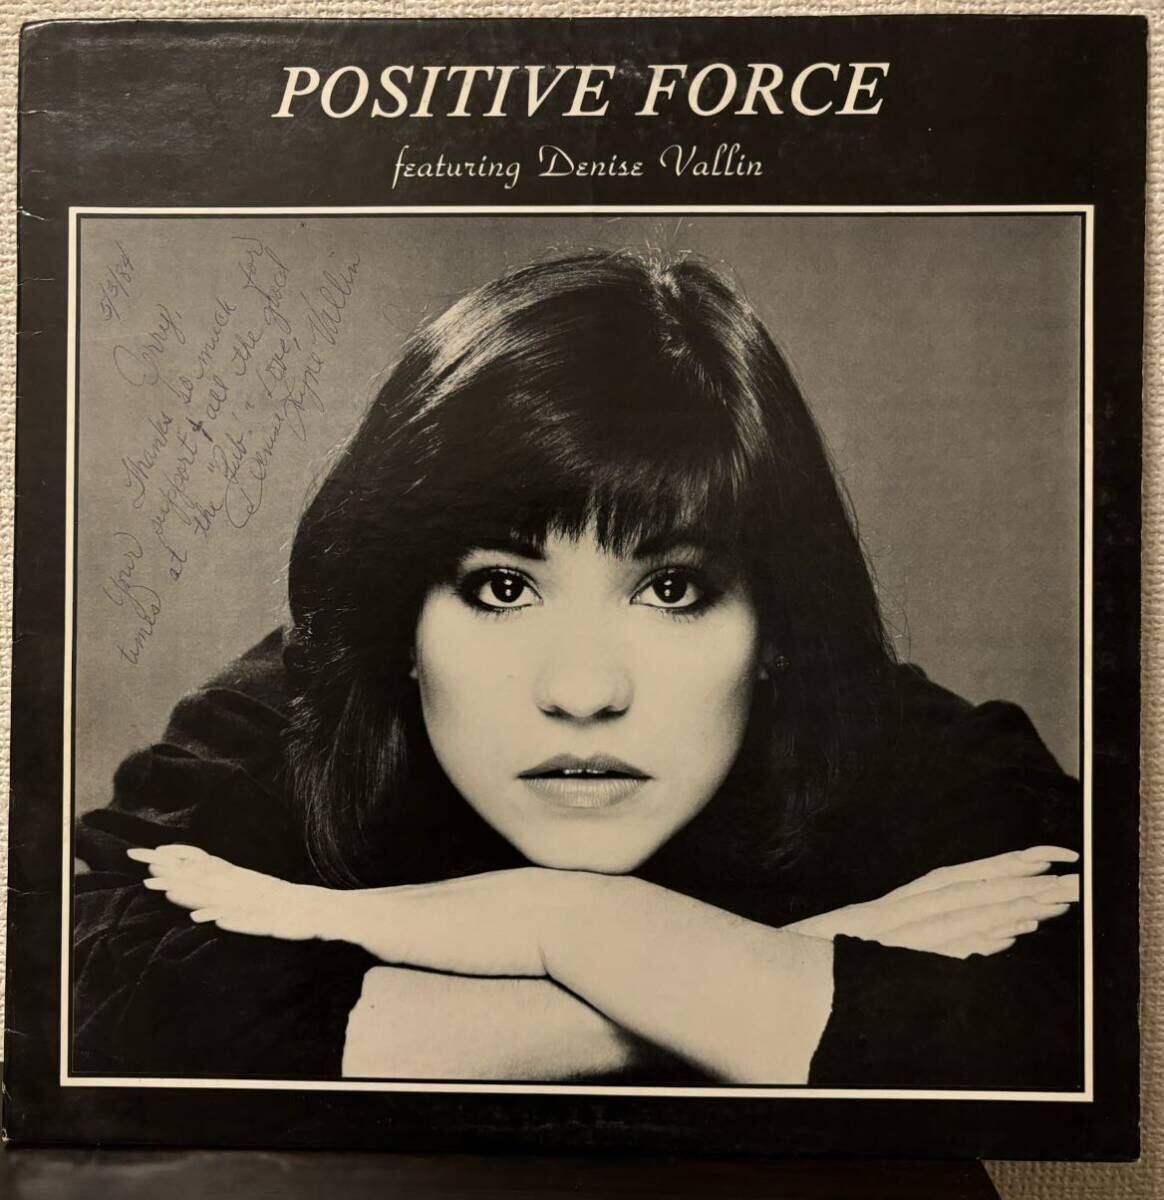 POSITIVE FORCE featuring Denise Vallin